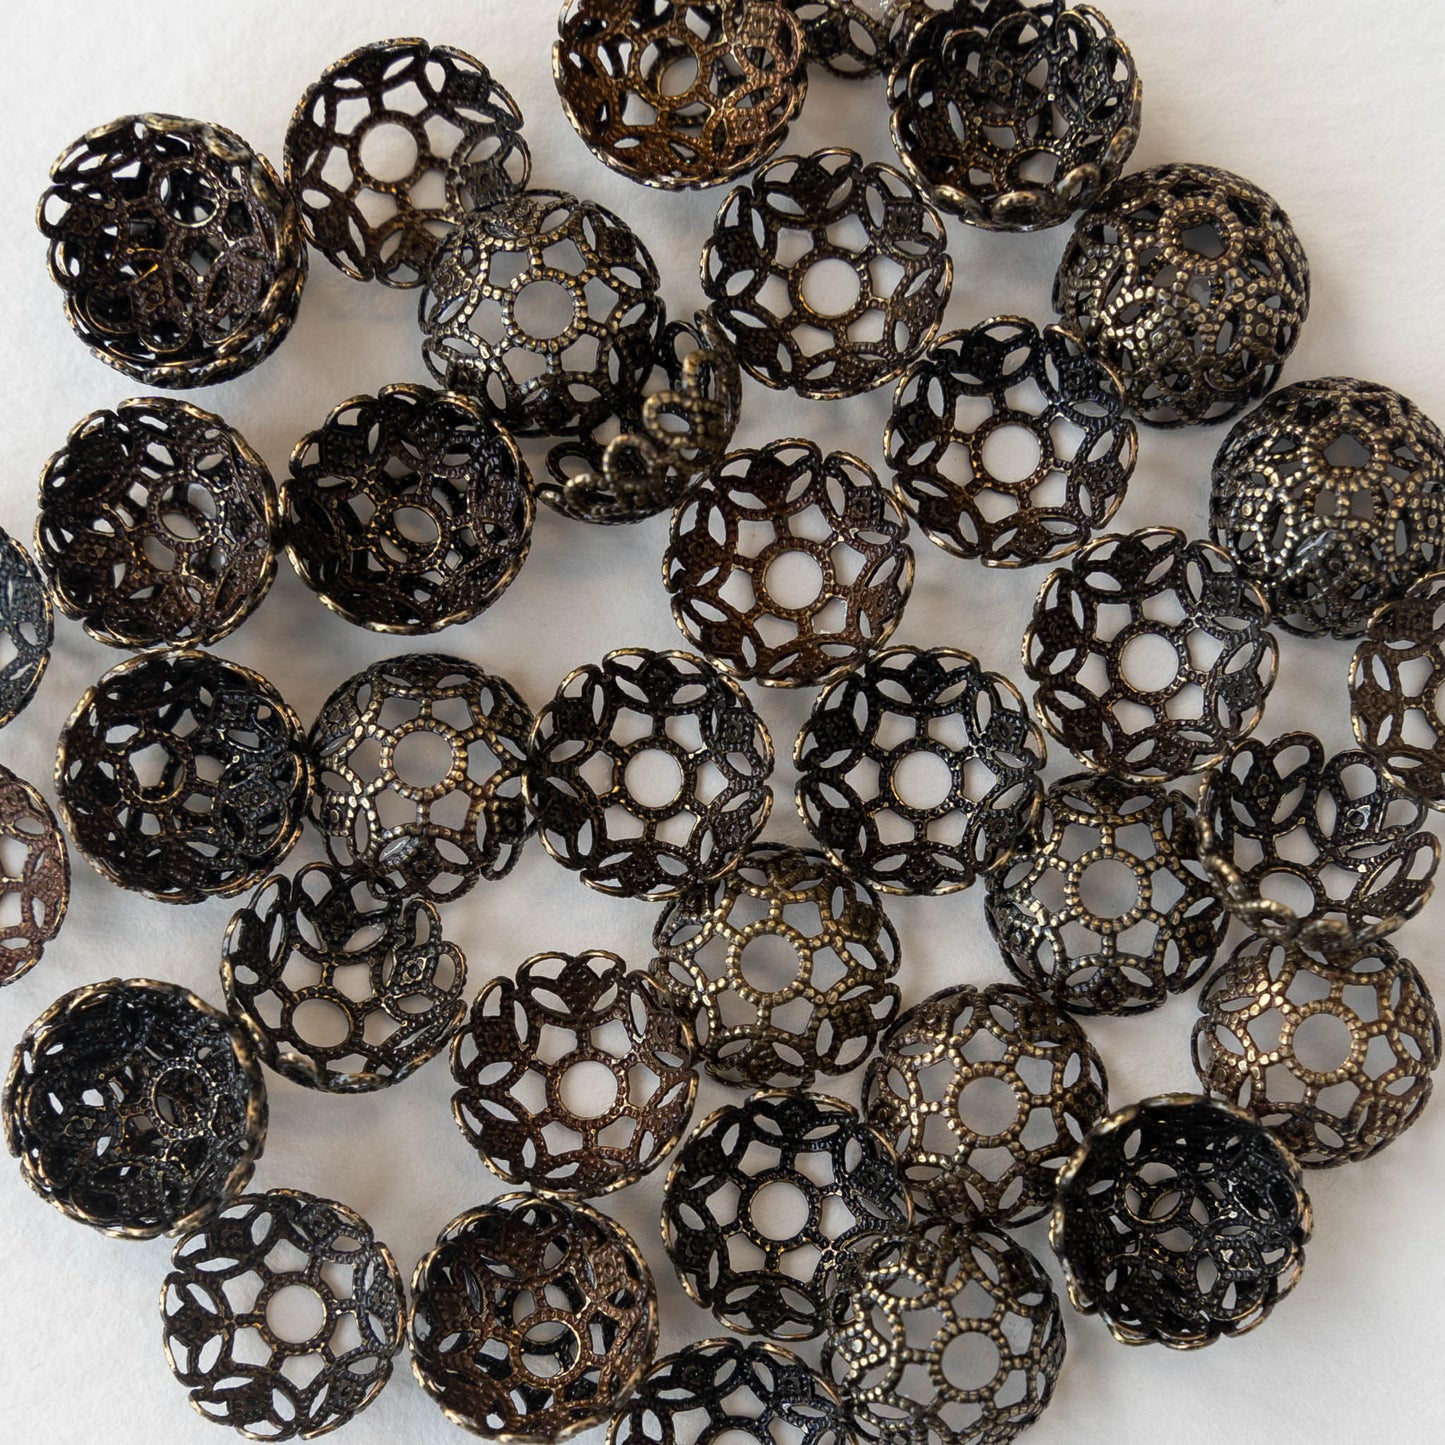 11mm Antiqued Brass Filagree Bead Caps - 20 Pieces